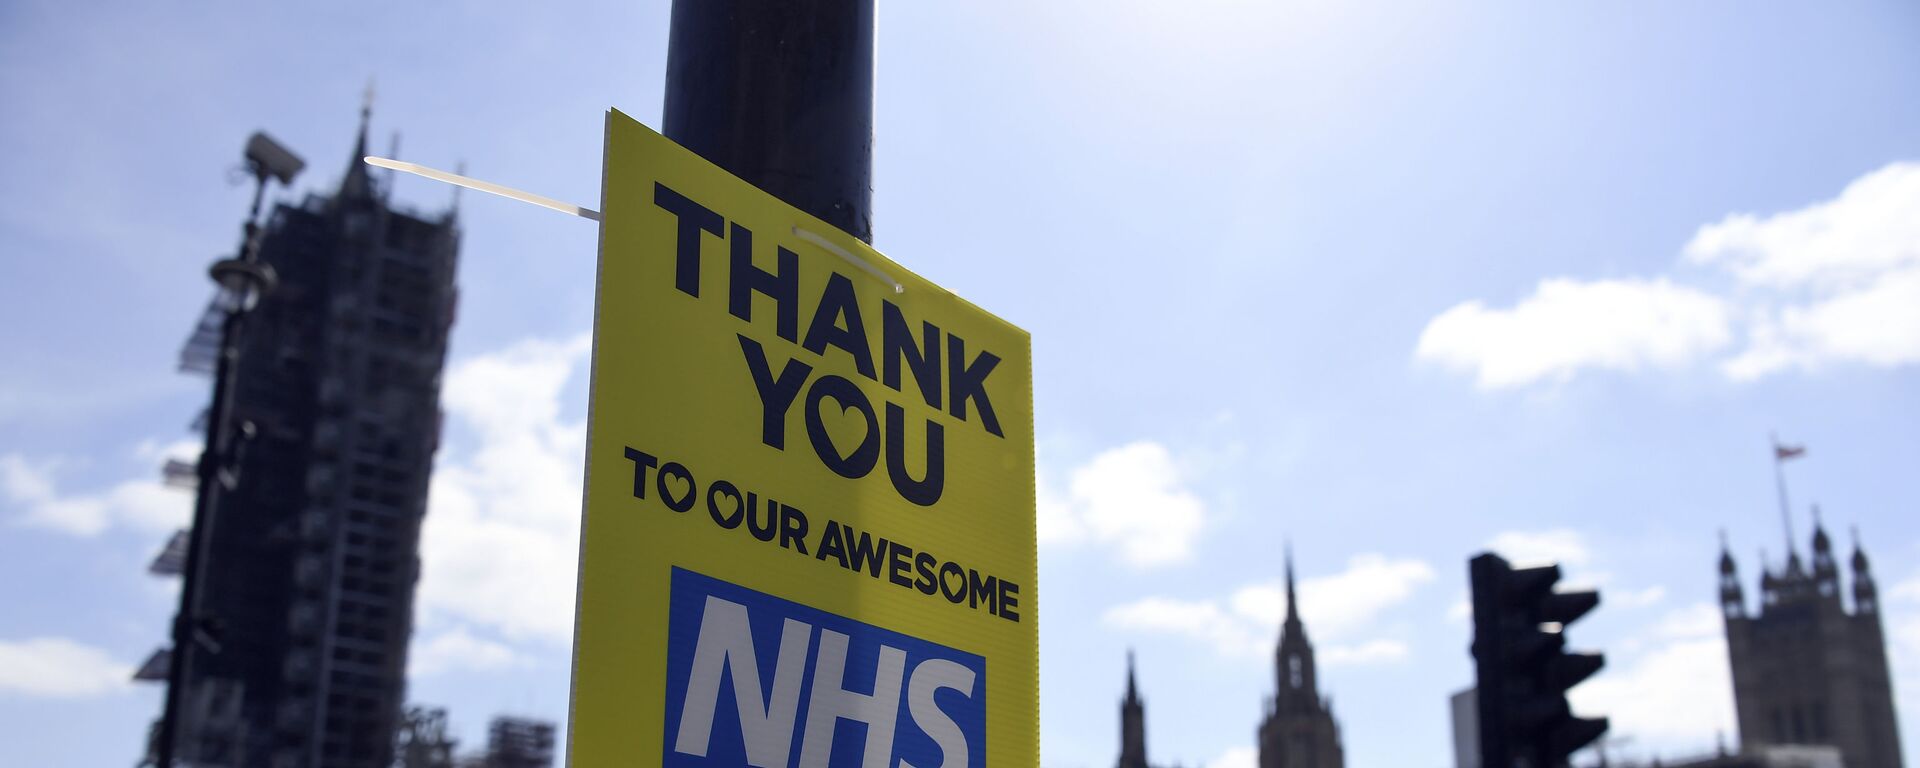 A message in support to the NHS is seen in Westminster, during to the Coronavirus outbreak, in London, 14 April 2020 - Sputnik International, 1920, 06.03.2021